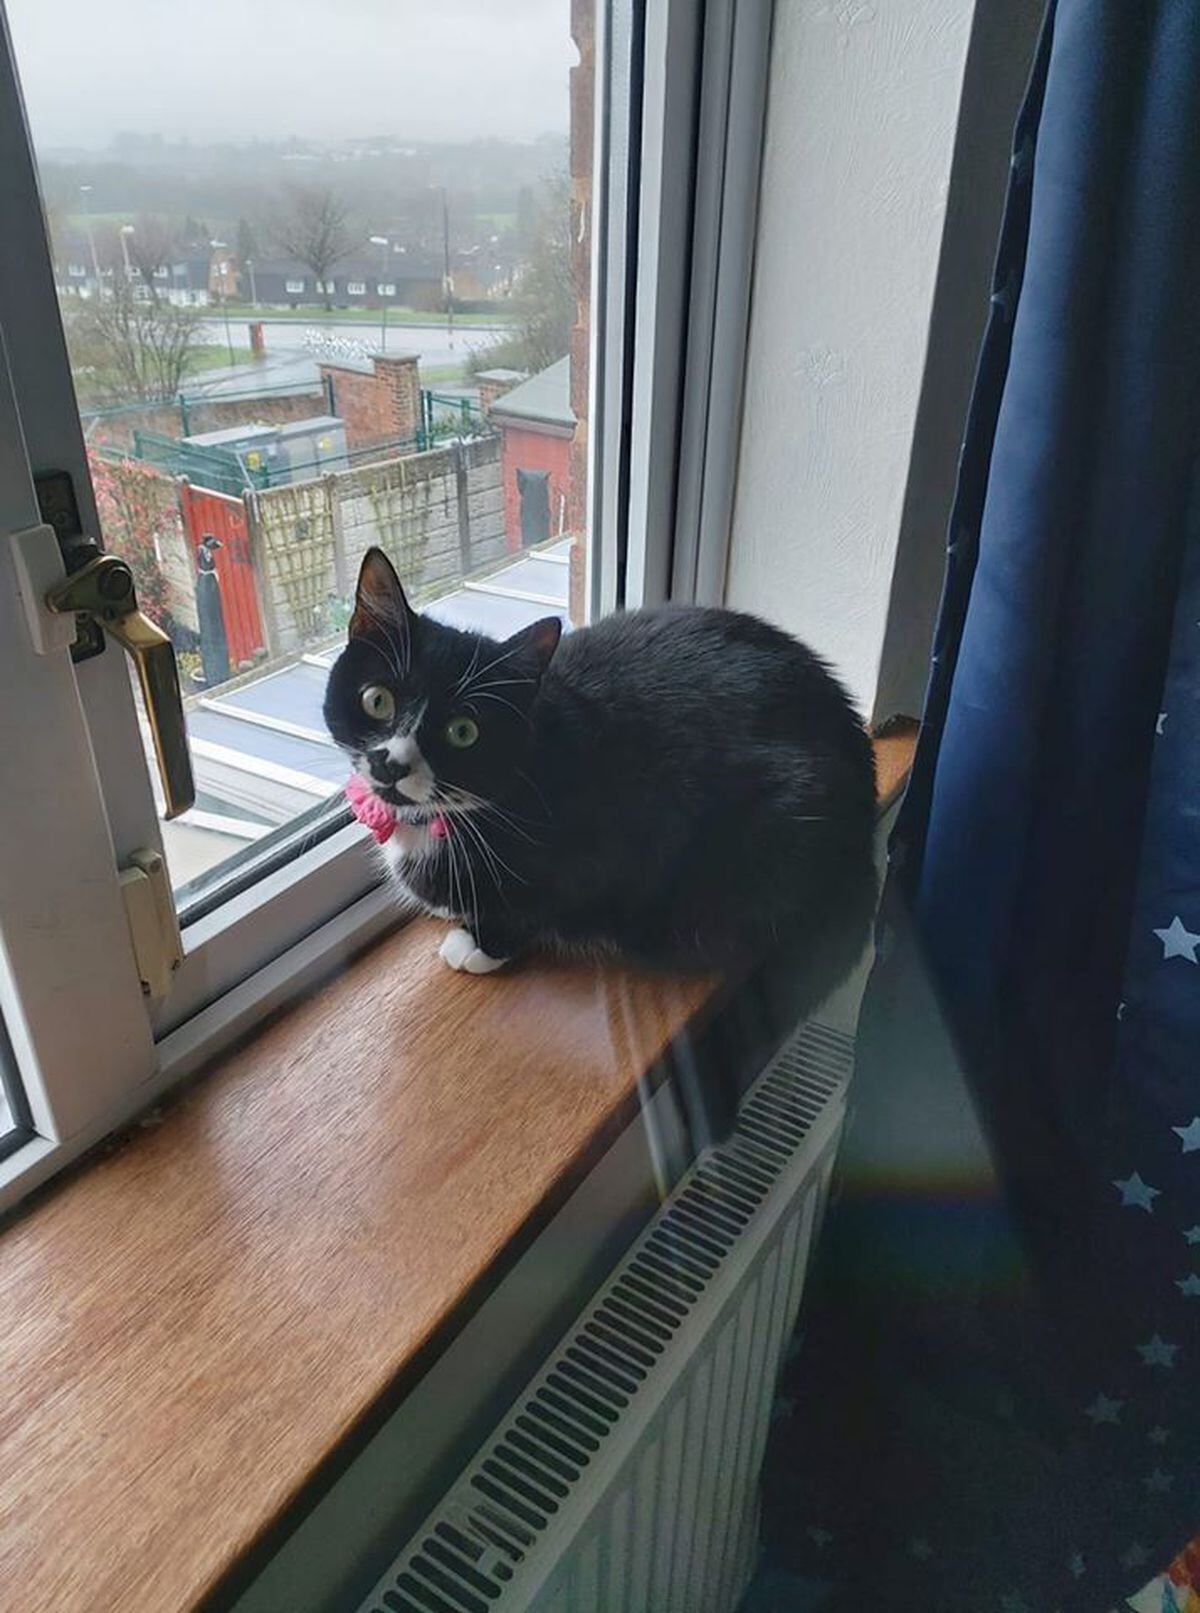 Pixi gazing out of the window when she should be hard at work. From Chloe Hill, Dudley